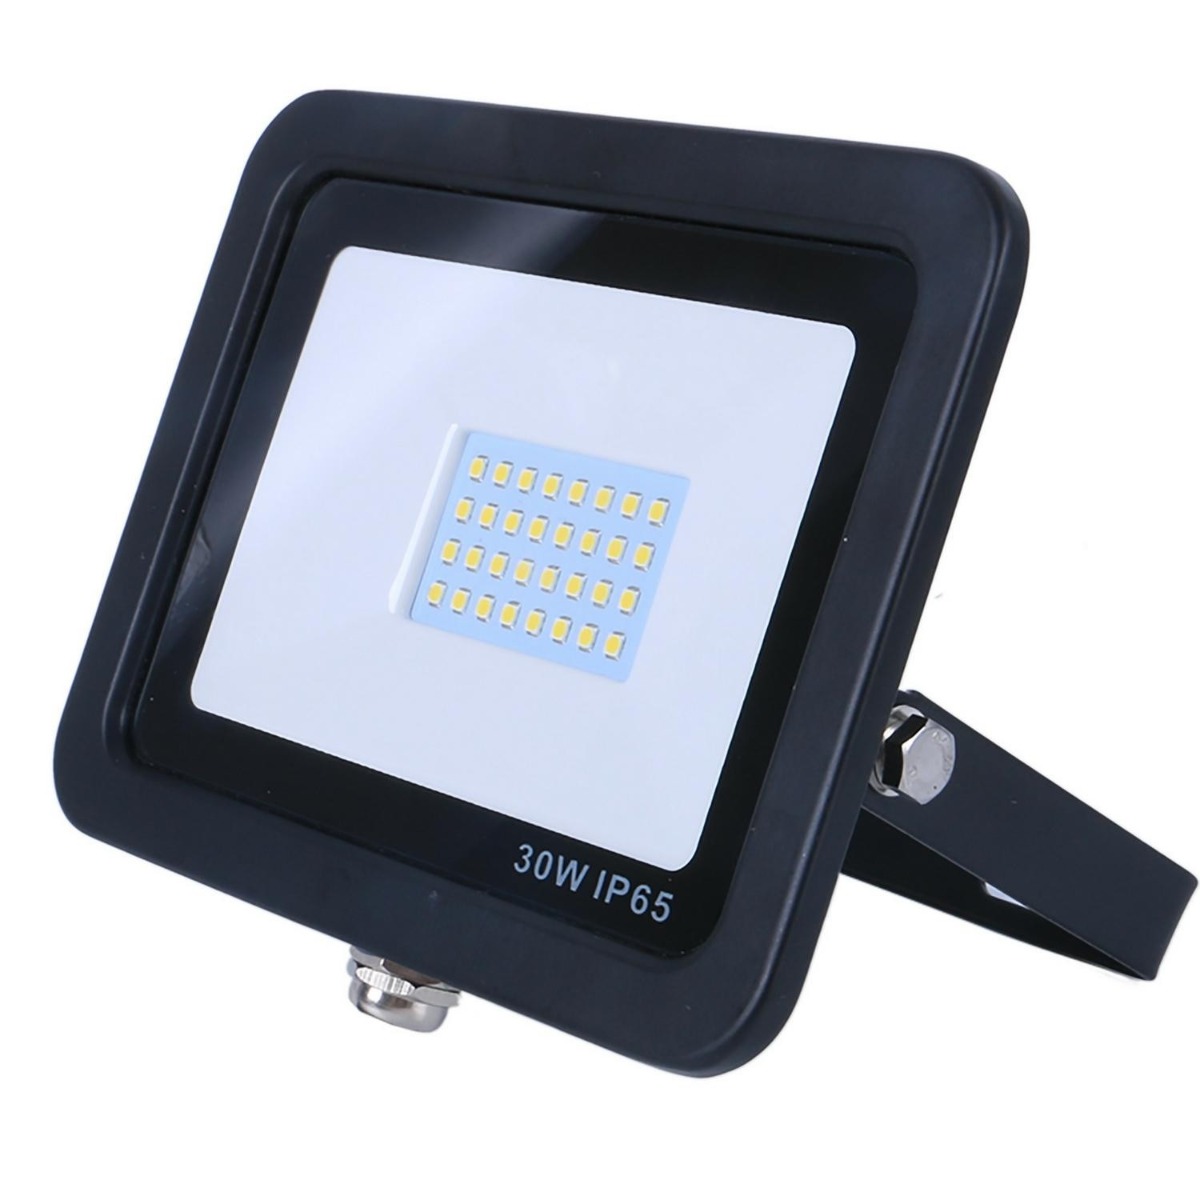 View 30w LED Floodlight Black in Cool White information